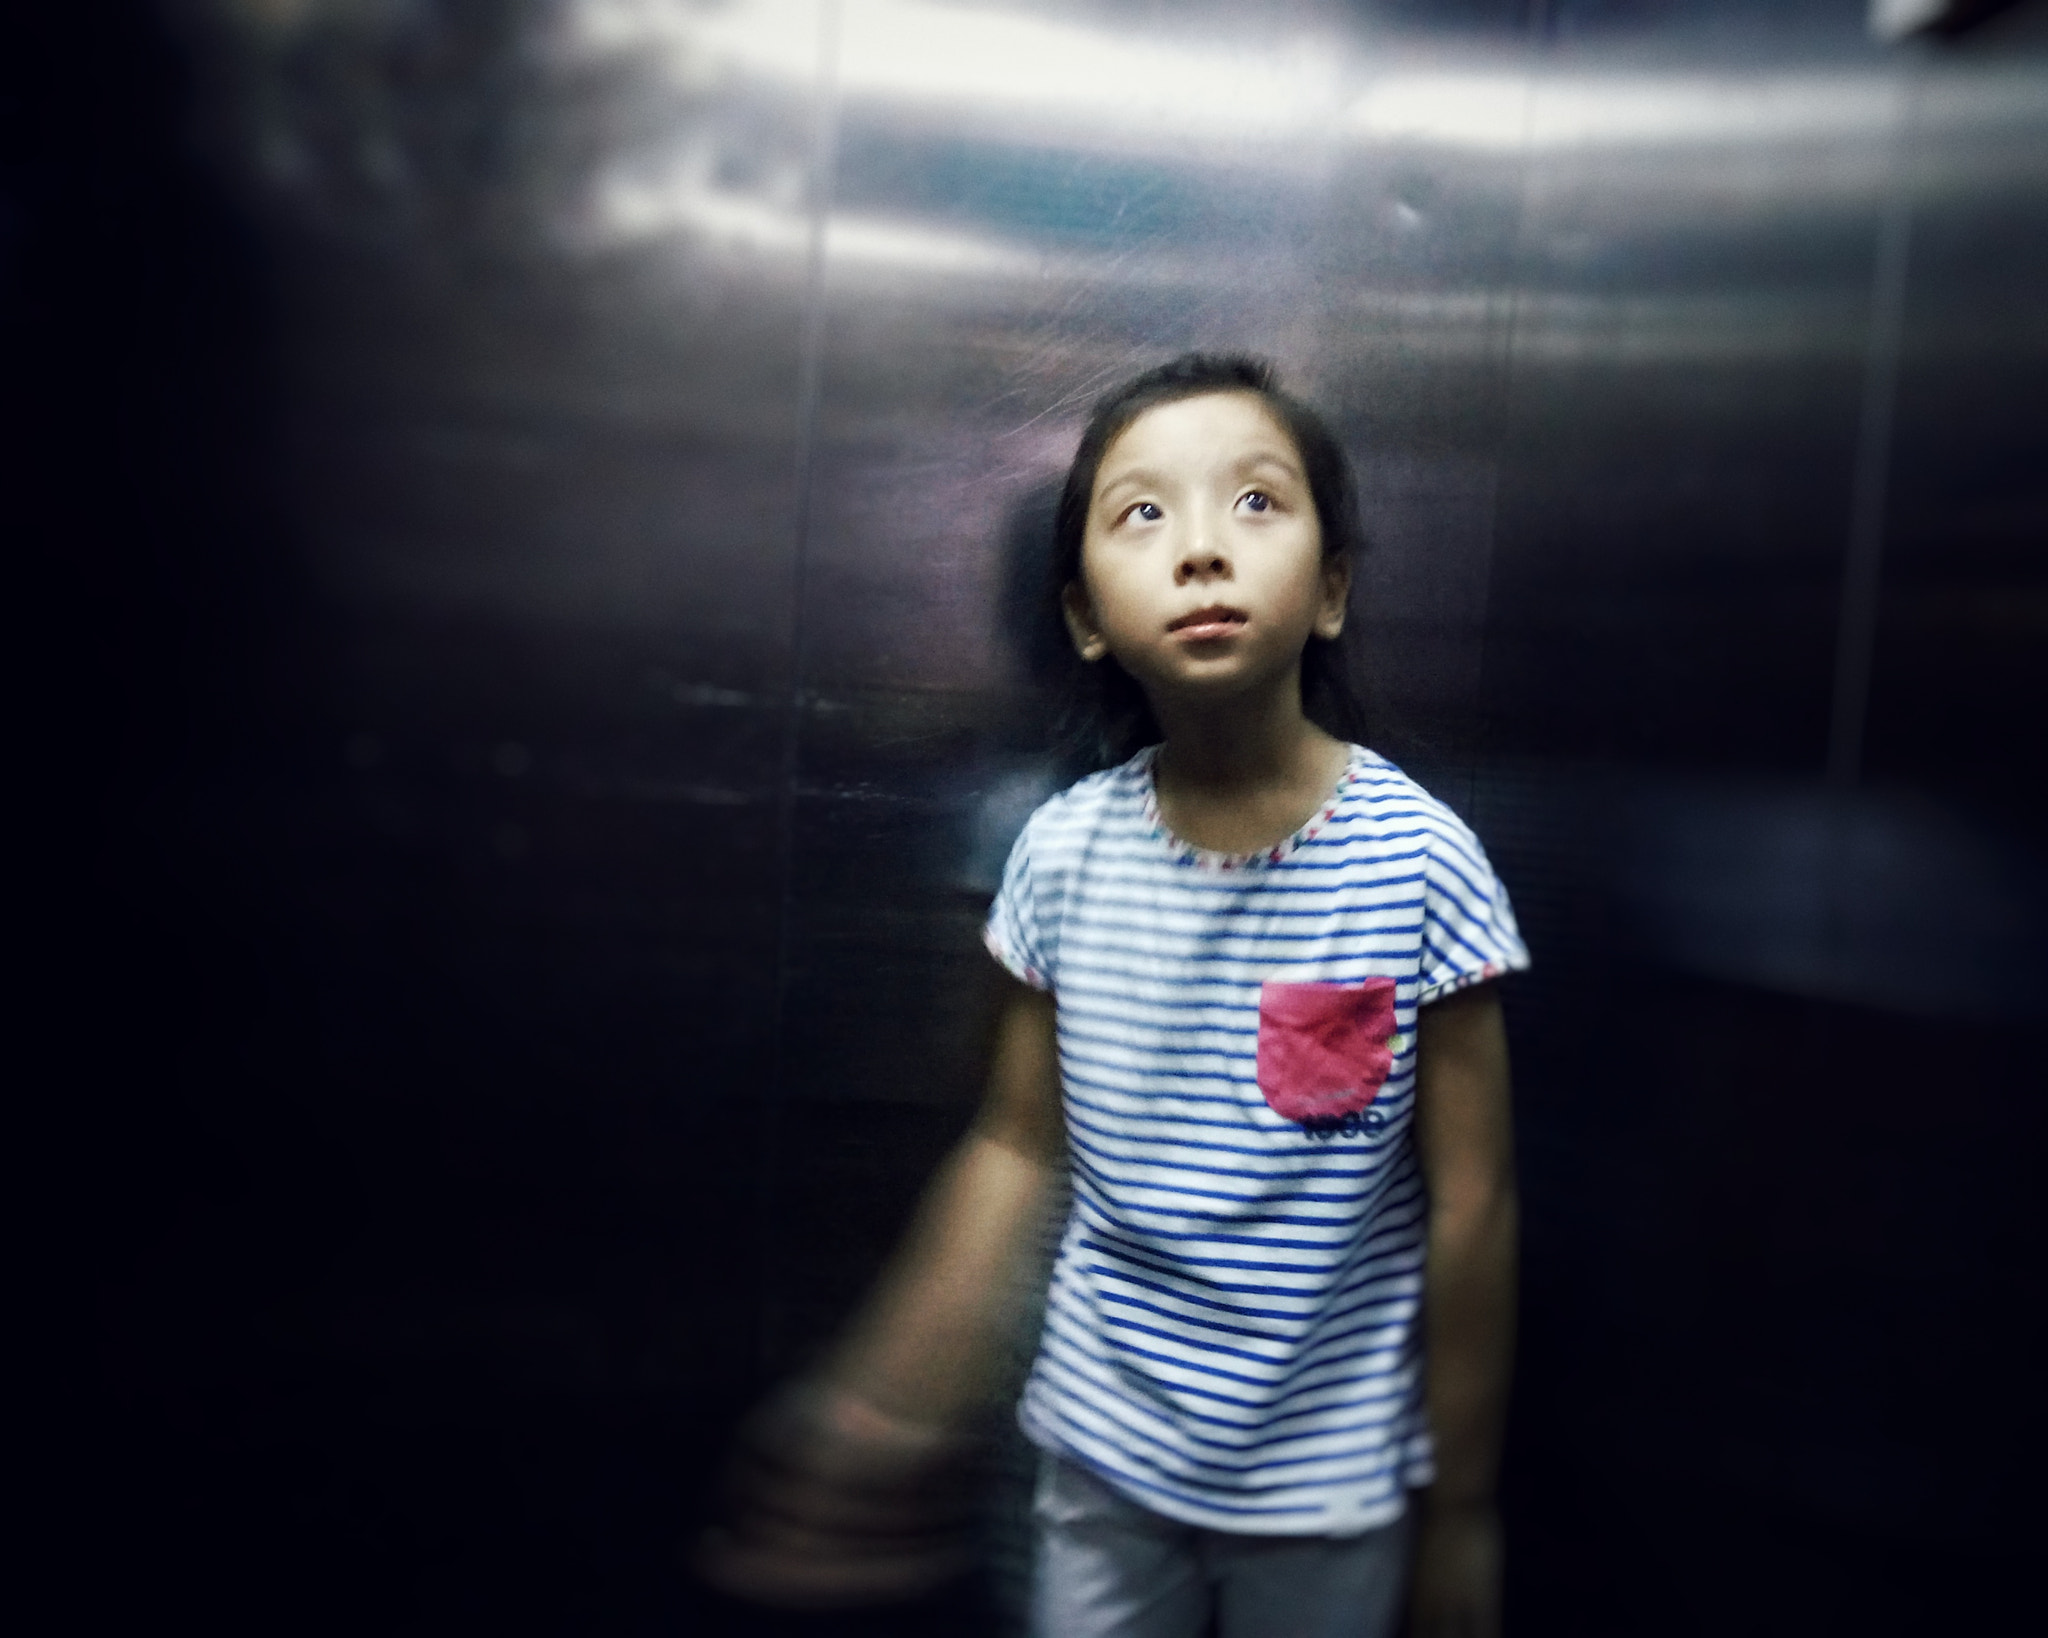 OPPO R7s sample photo. The girl in the elevator photography